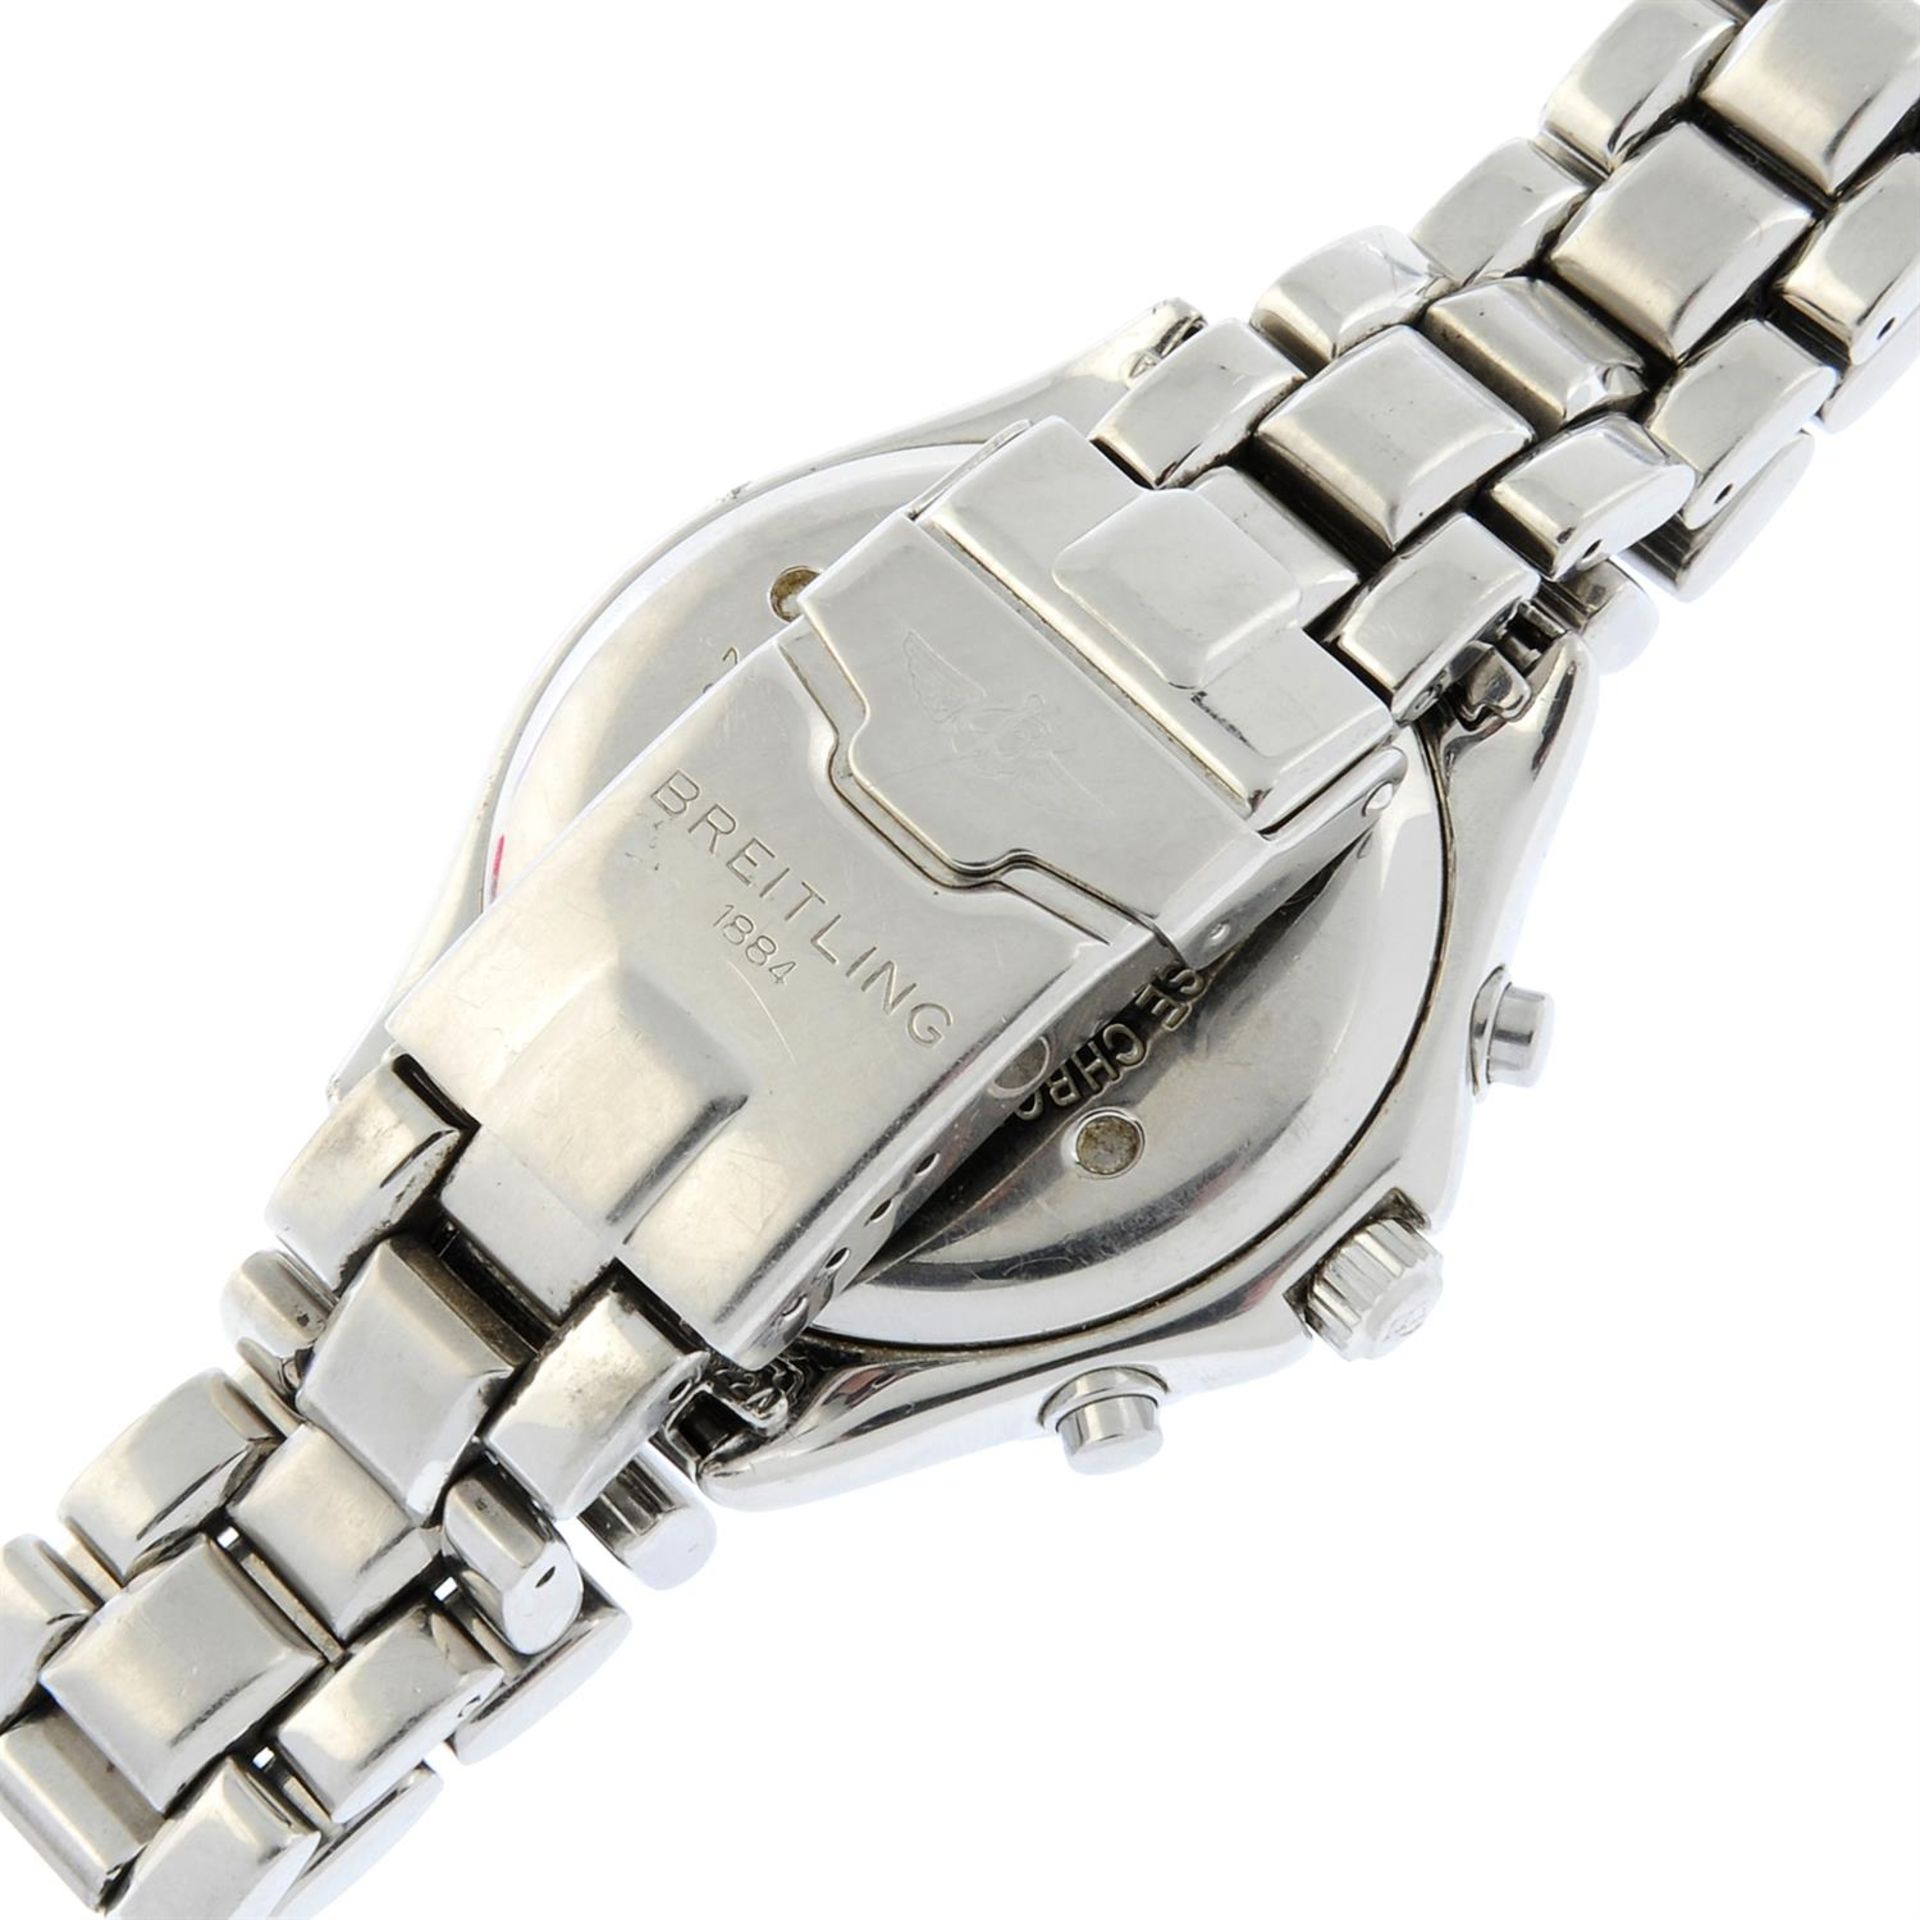 BREITLING - a stainless steel Chrono Colt chronograph bracelet watch, 38mm. - Image 2 of 4